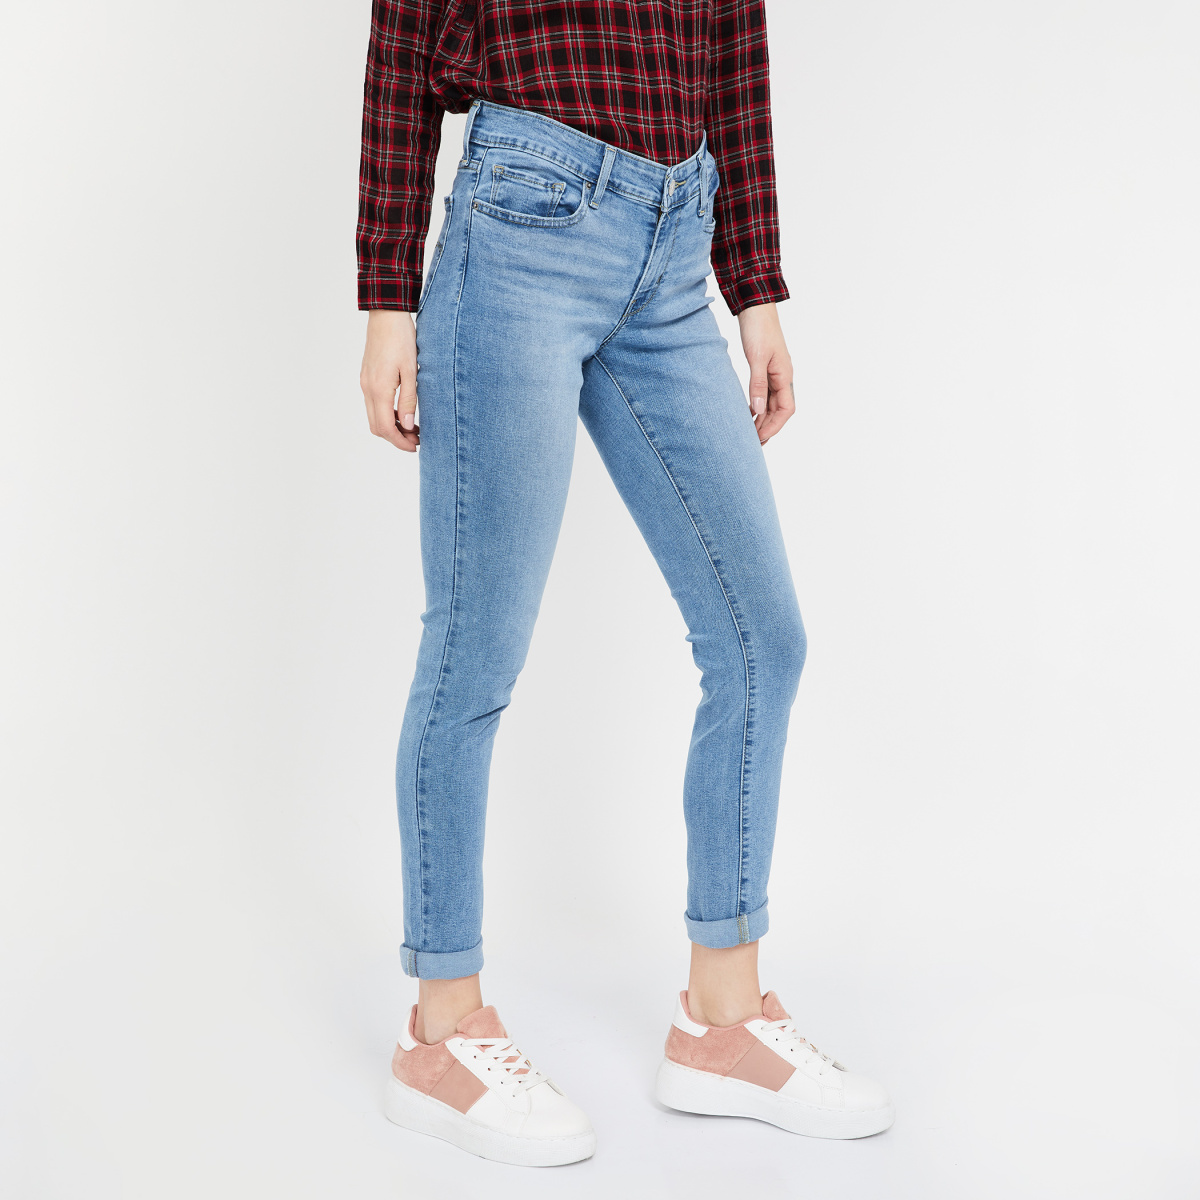 LEVI'S Stonewashed Skinny Fit Jeans